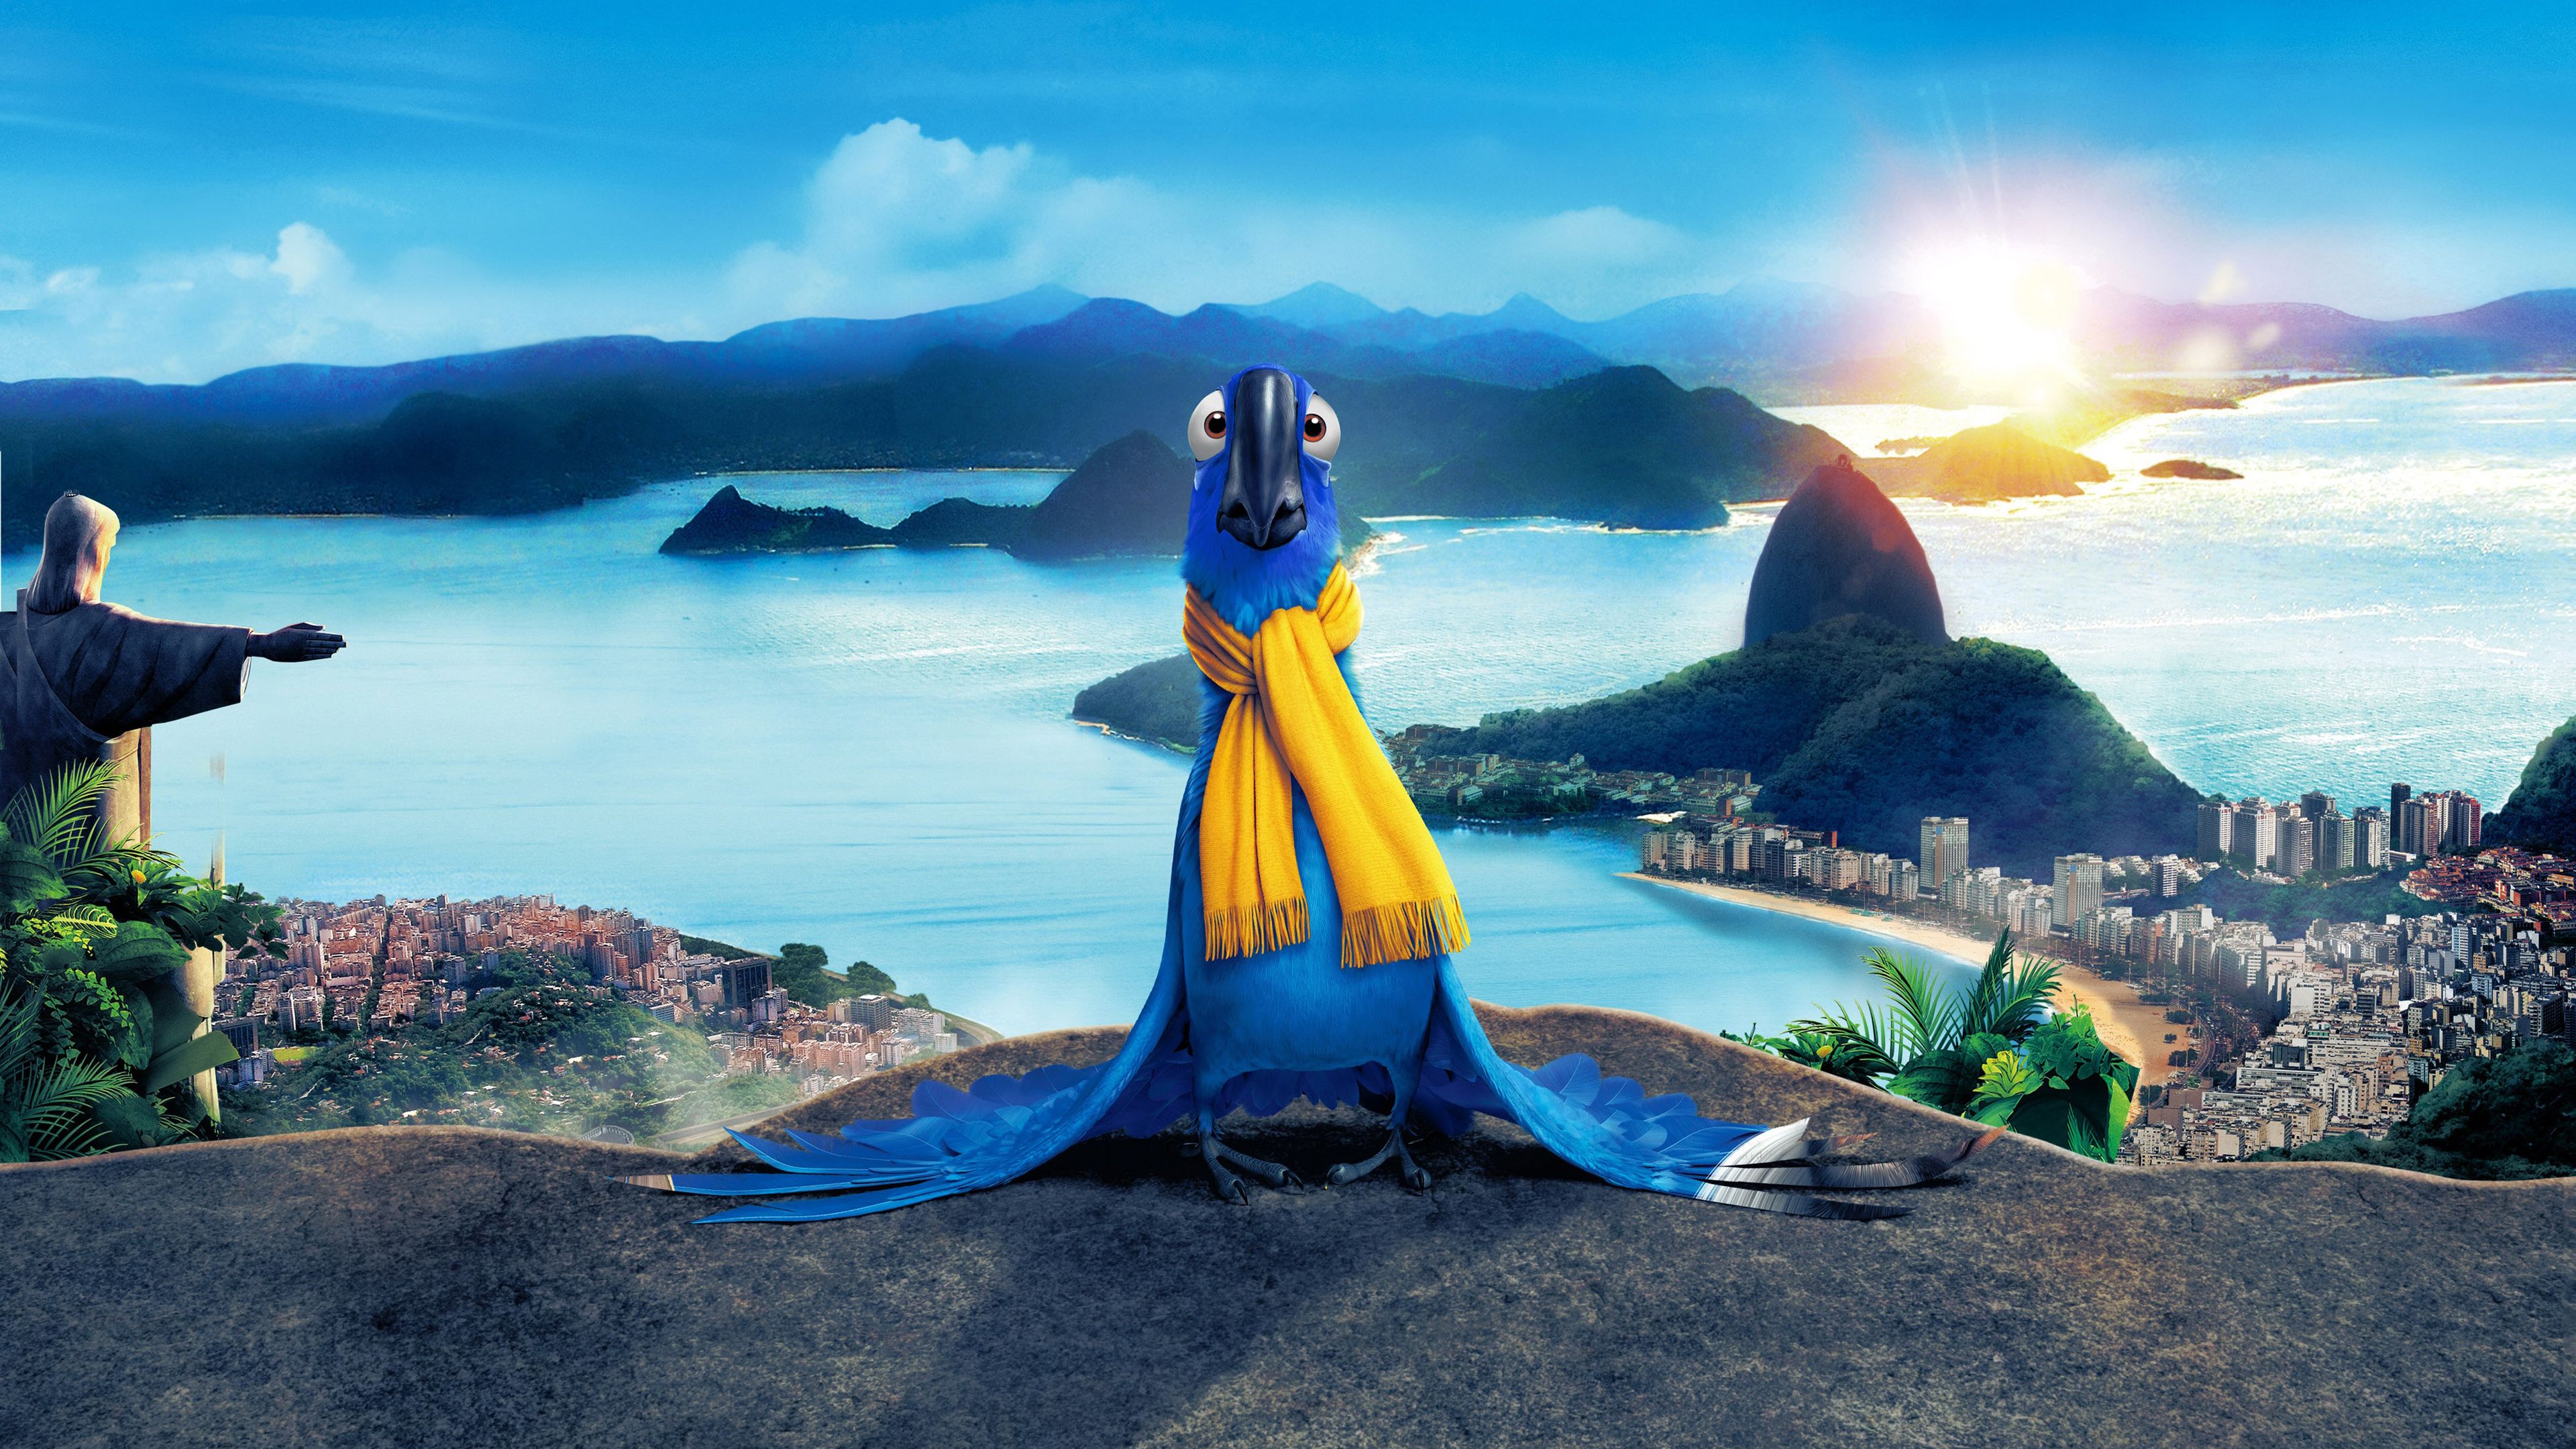 Rio 4k Ultra HD Wallpaper and Background Imagex2160